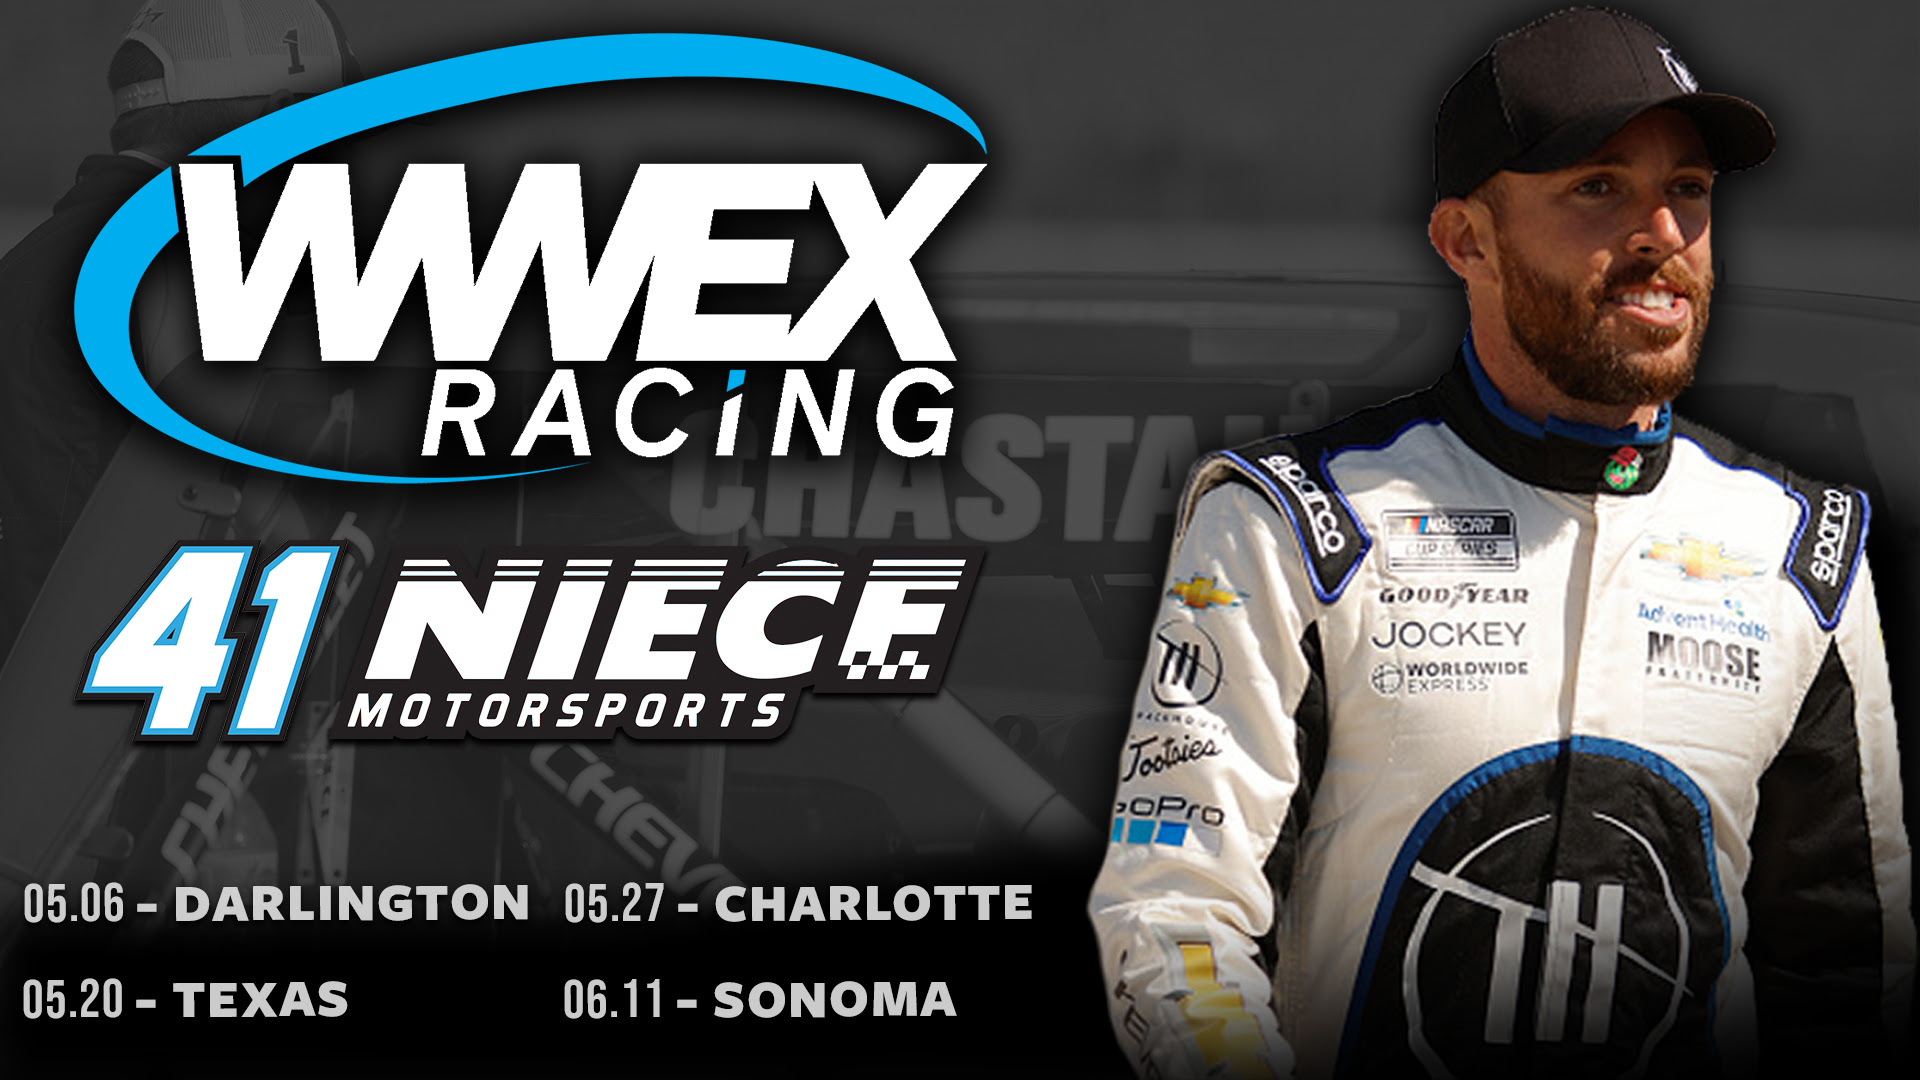 Worldwide Express Expands Partnership with Niece Motorsports, Ross Chastain